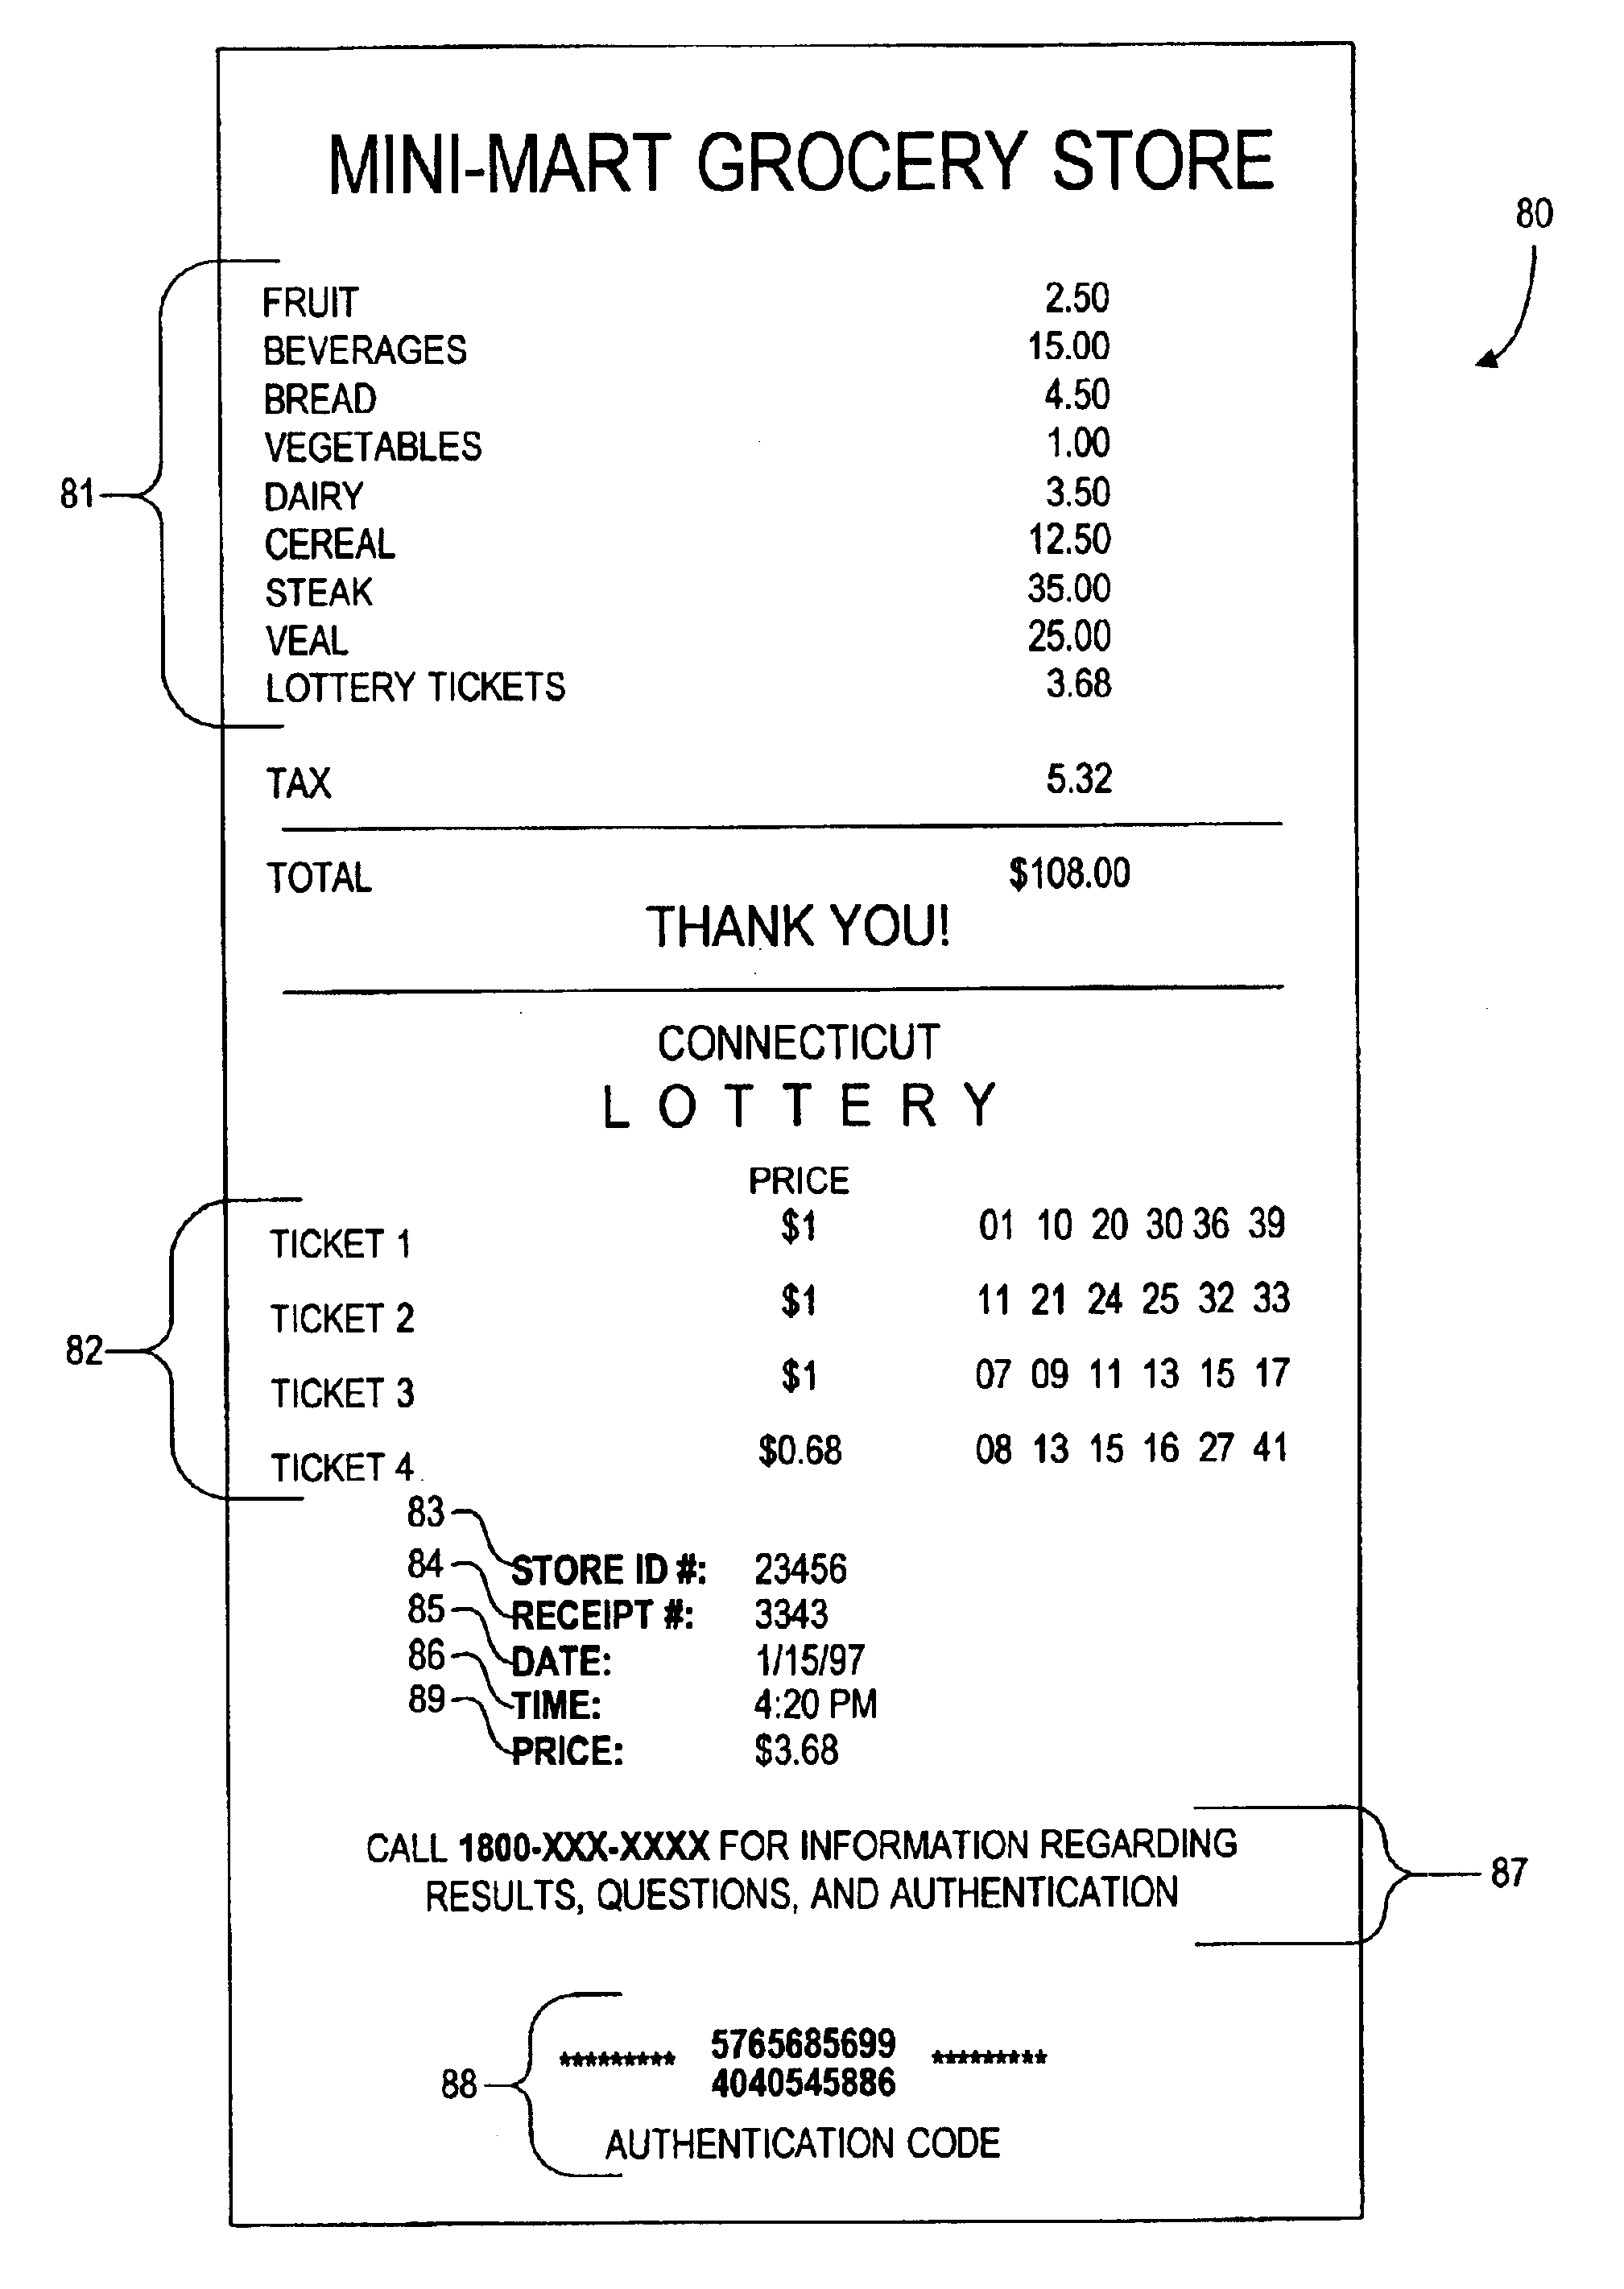 System and method for performing lottery ticket transactions utilizing point-of-sale terminals